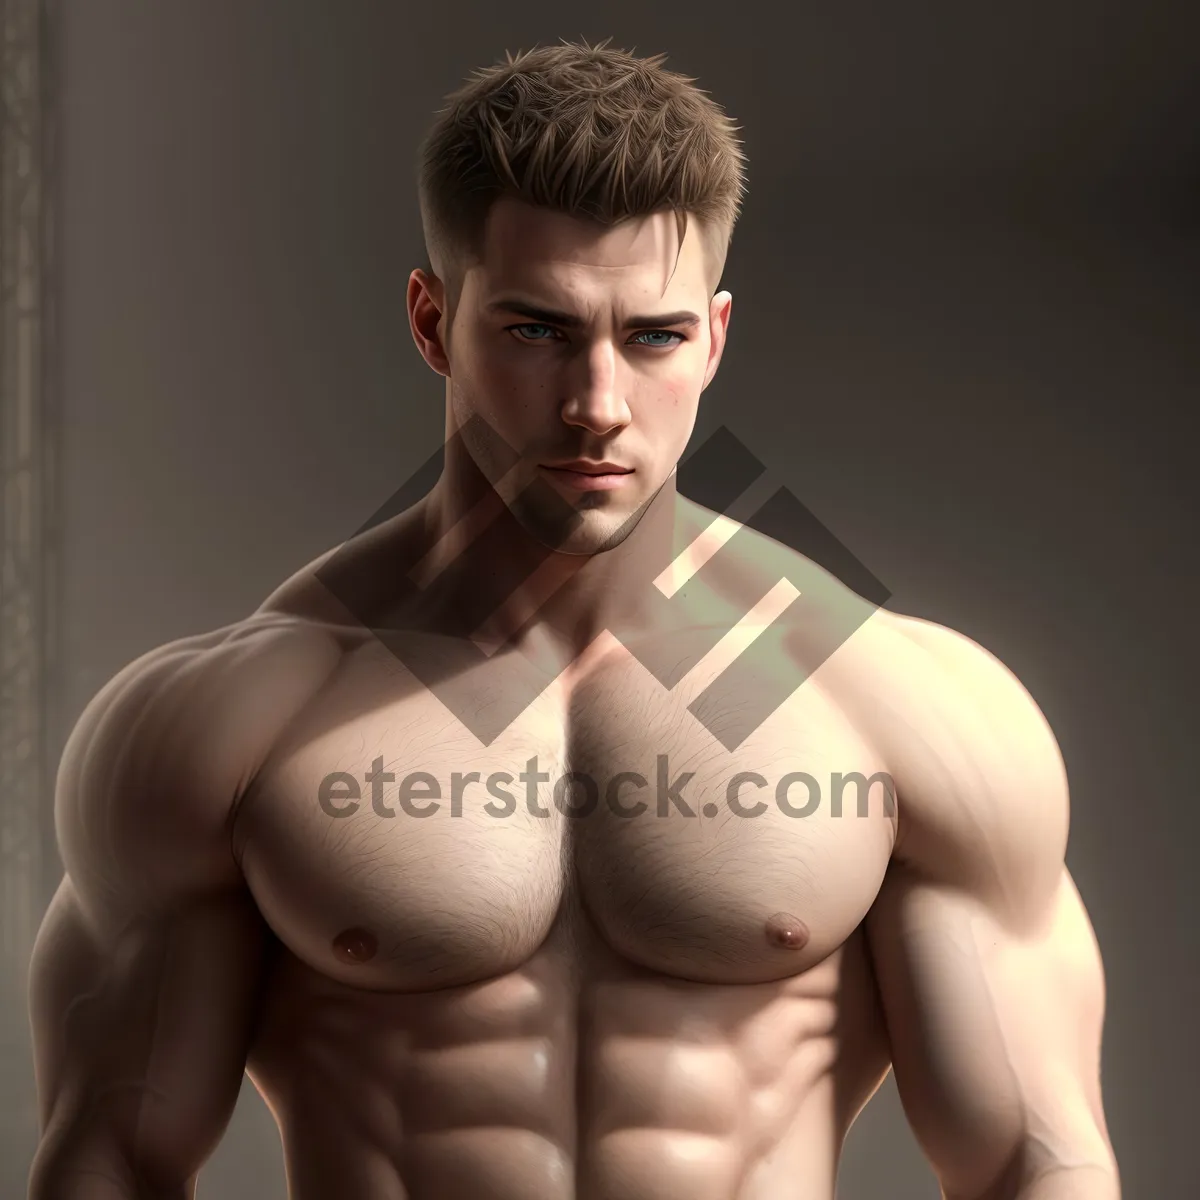 Picture of Muscular male fitness model with attractive physique